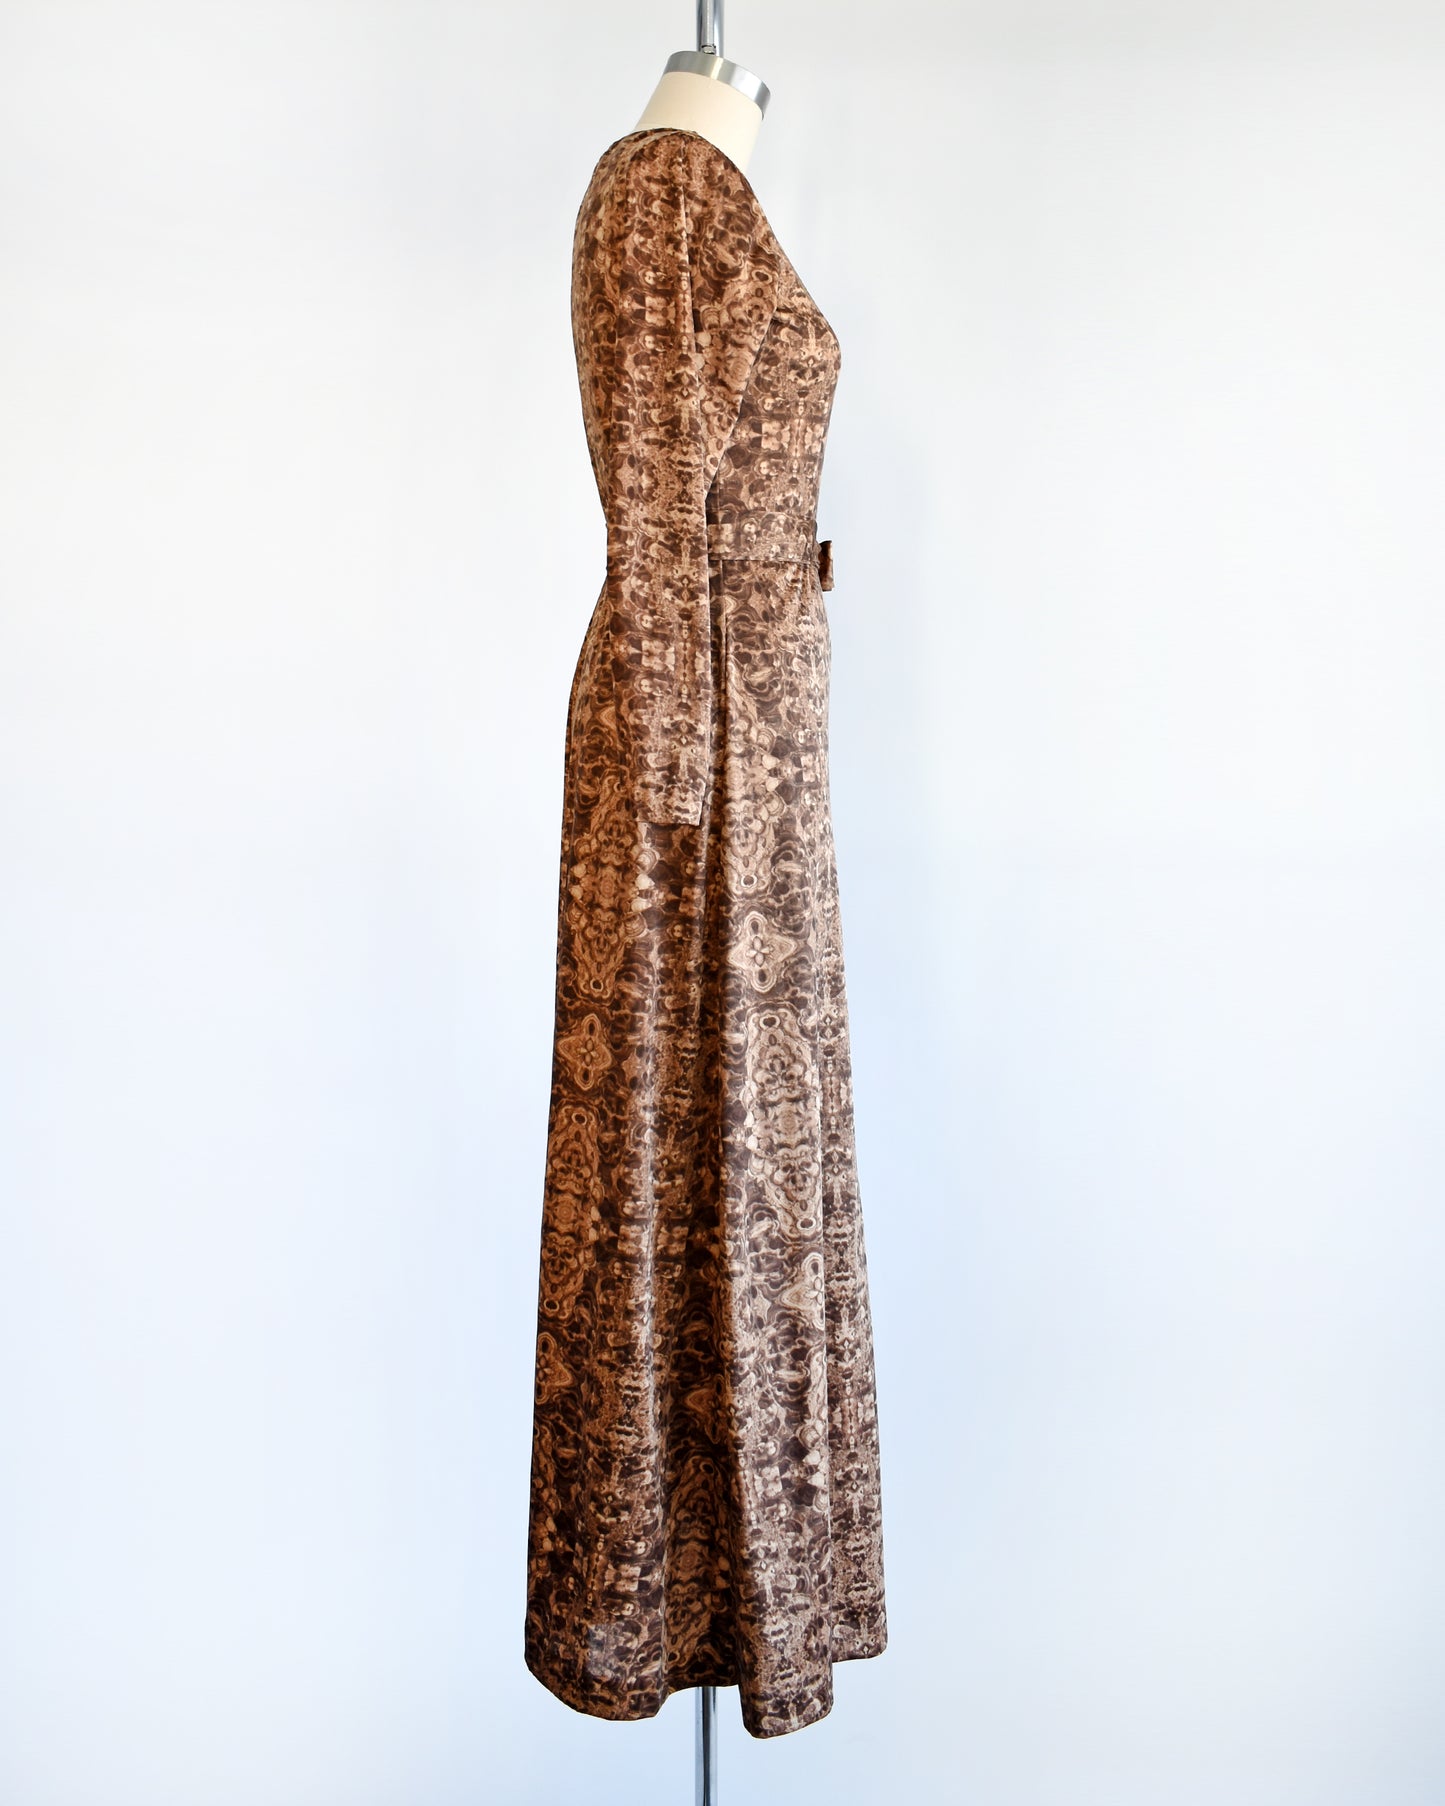 Side view of a vintage 1970s long sleeve maxi dress which features a psychedelic kaleidoscope pattern in light and dark brown.